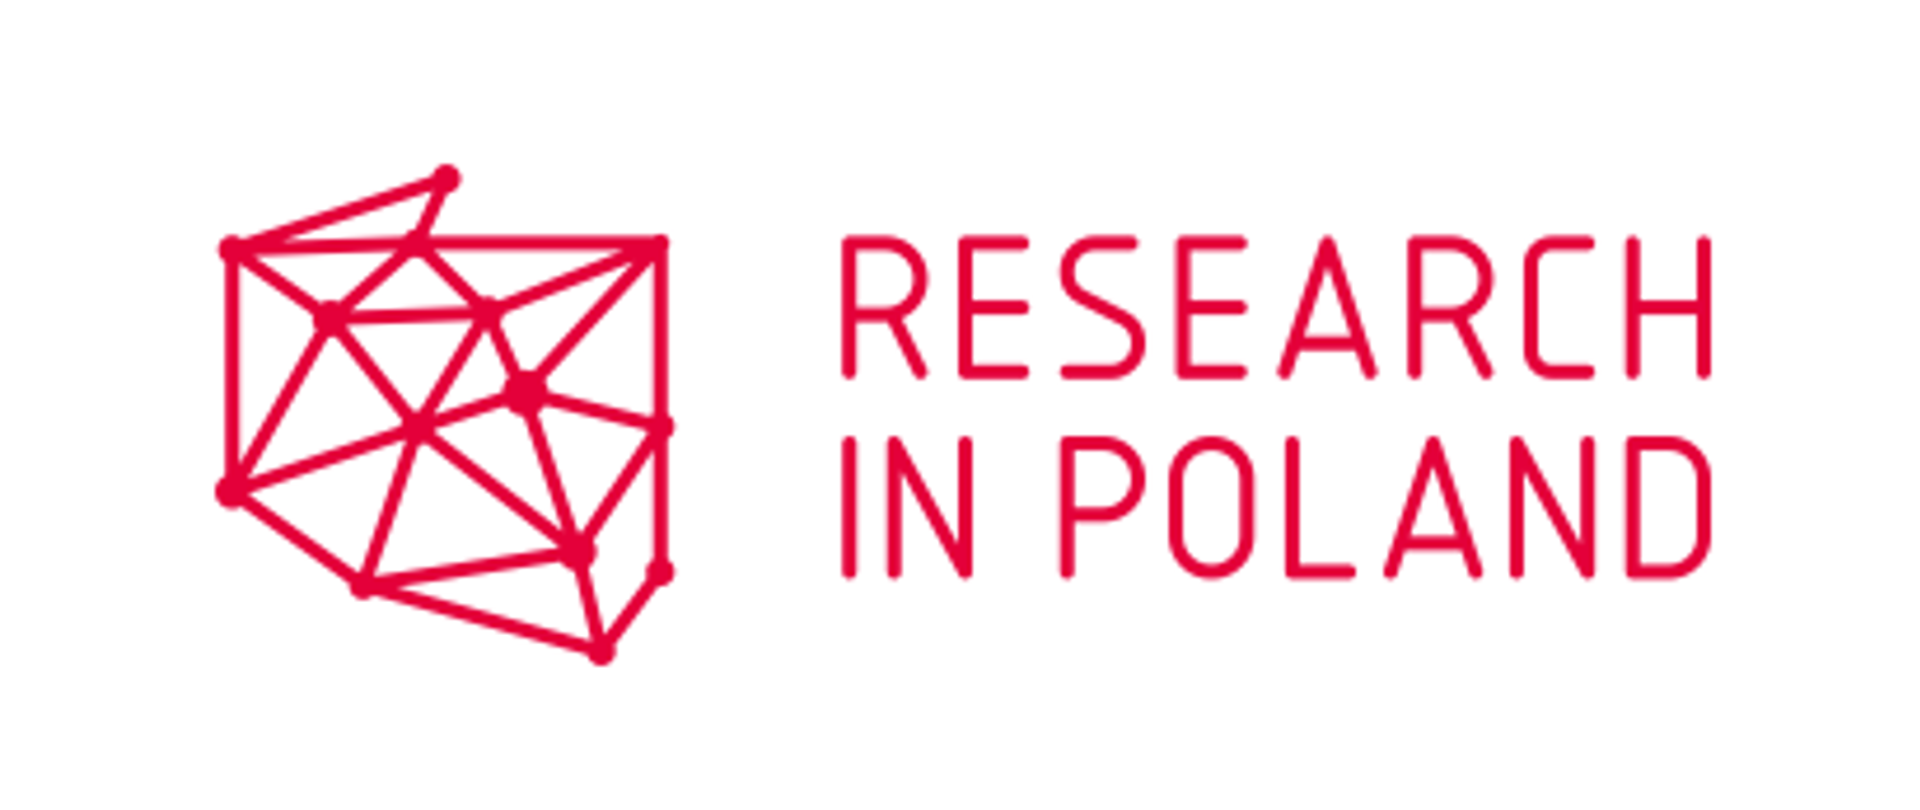 Nowy portal "Research in Poland"